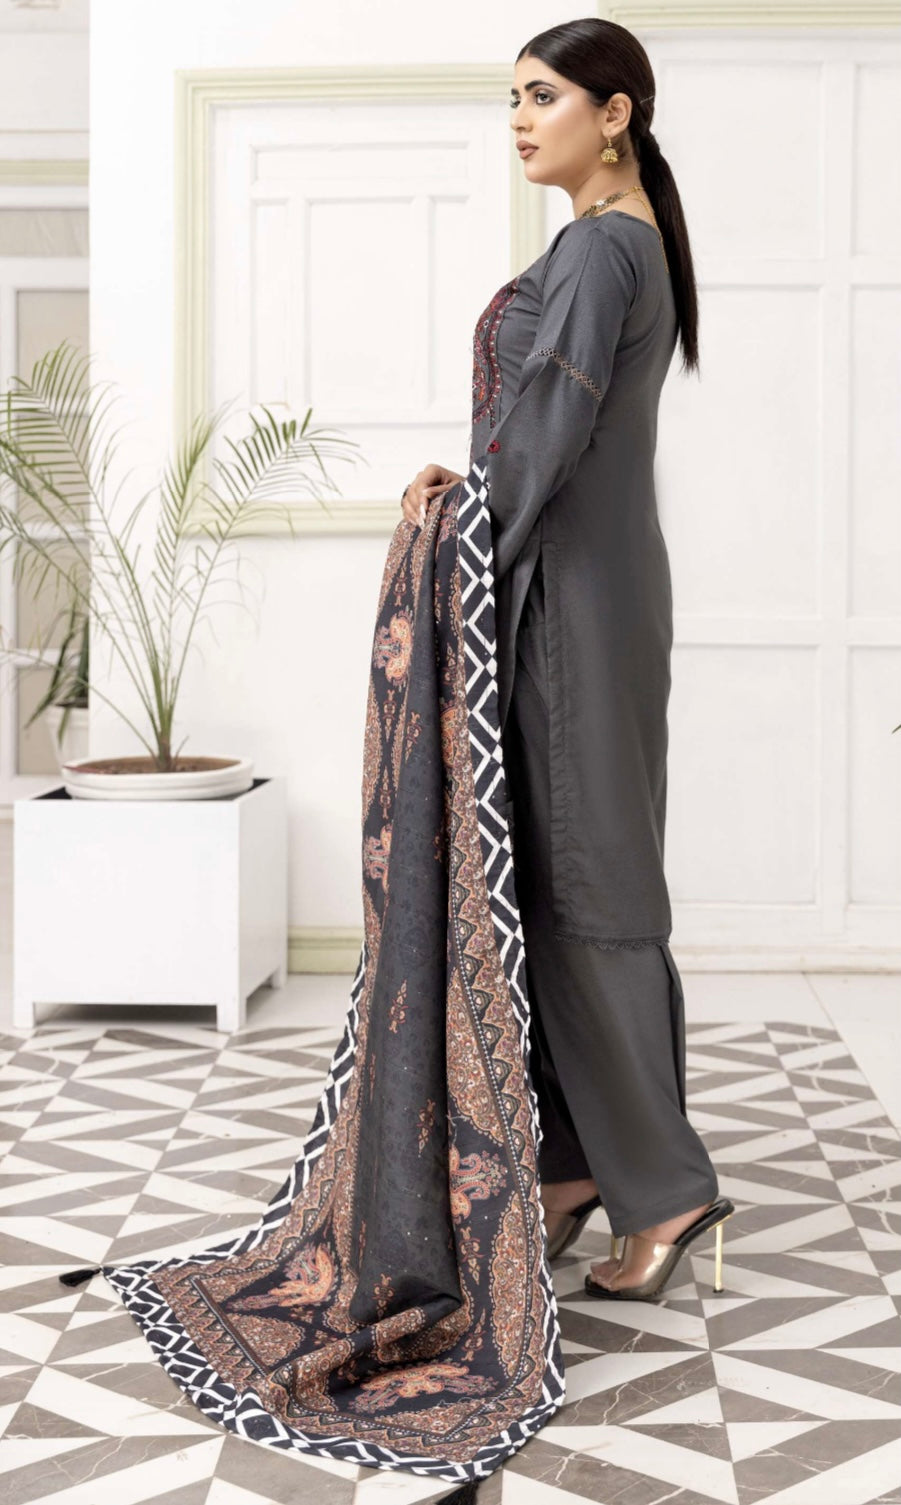 SIMRANS MAHI Dhanak Embroidered 3 Piece Winter Outfit With Shawl MSH04